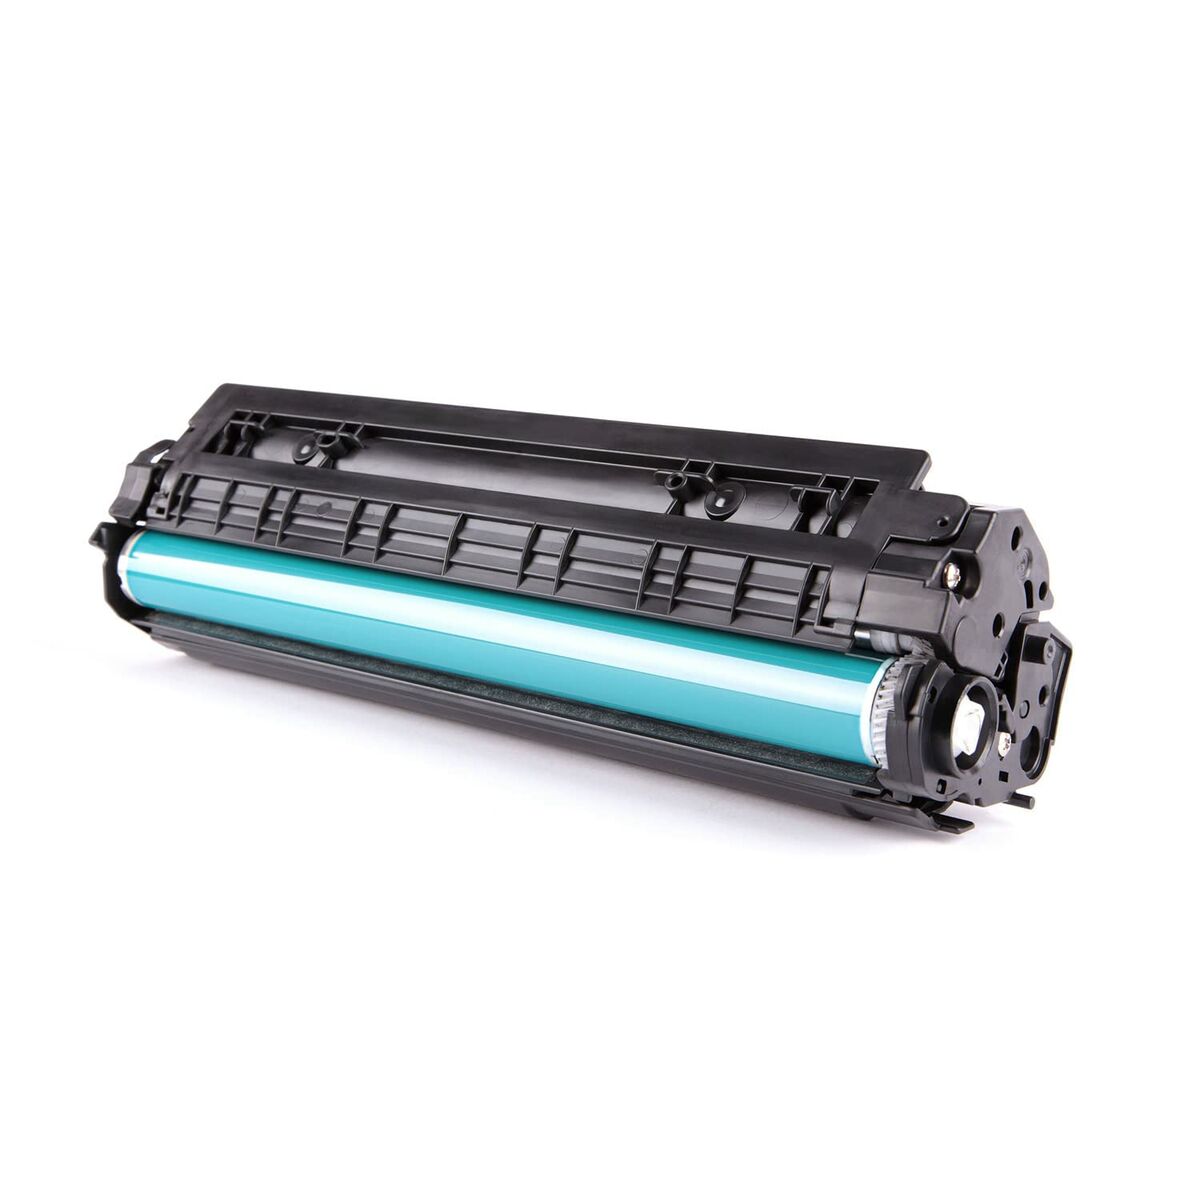 Toner Kyocera 1T02XCCNL0 Cyan, Kyocera, Computing, Printers and accessories, toner-kyocera-1t02xccnl0-cyan, Brand_Kyocera, category-reference-2609, category-reference-2642, category-reference-2876, category-reference-t-19685, category-reference-t-19911, category-reference-t-21377, category-reference-t-25688, Condition_NEW, office, Price_200 - 300, Teleworking, RiotNook